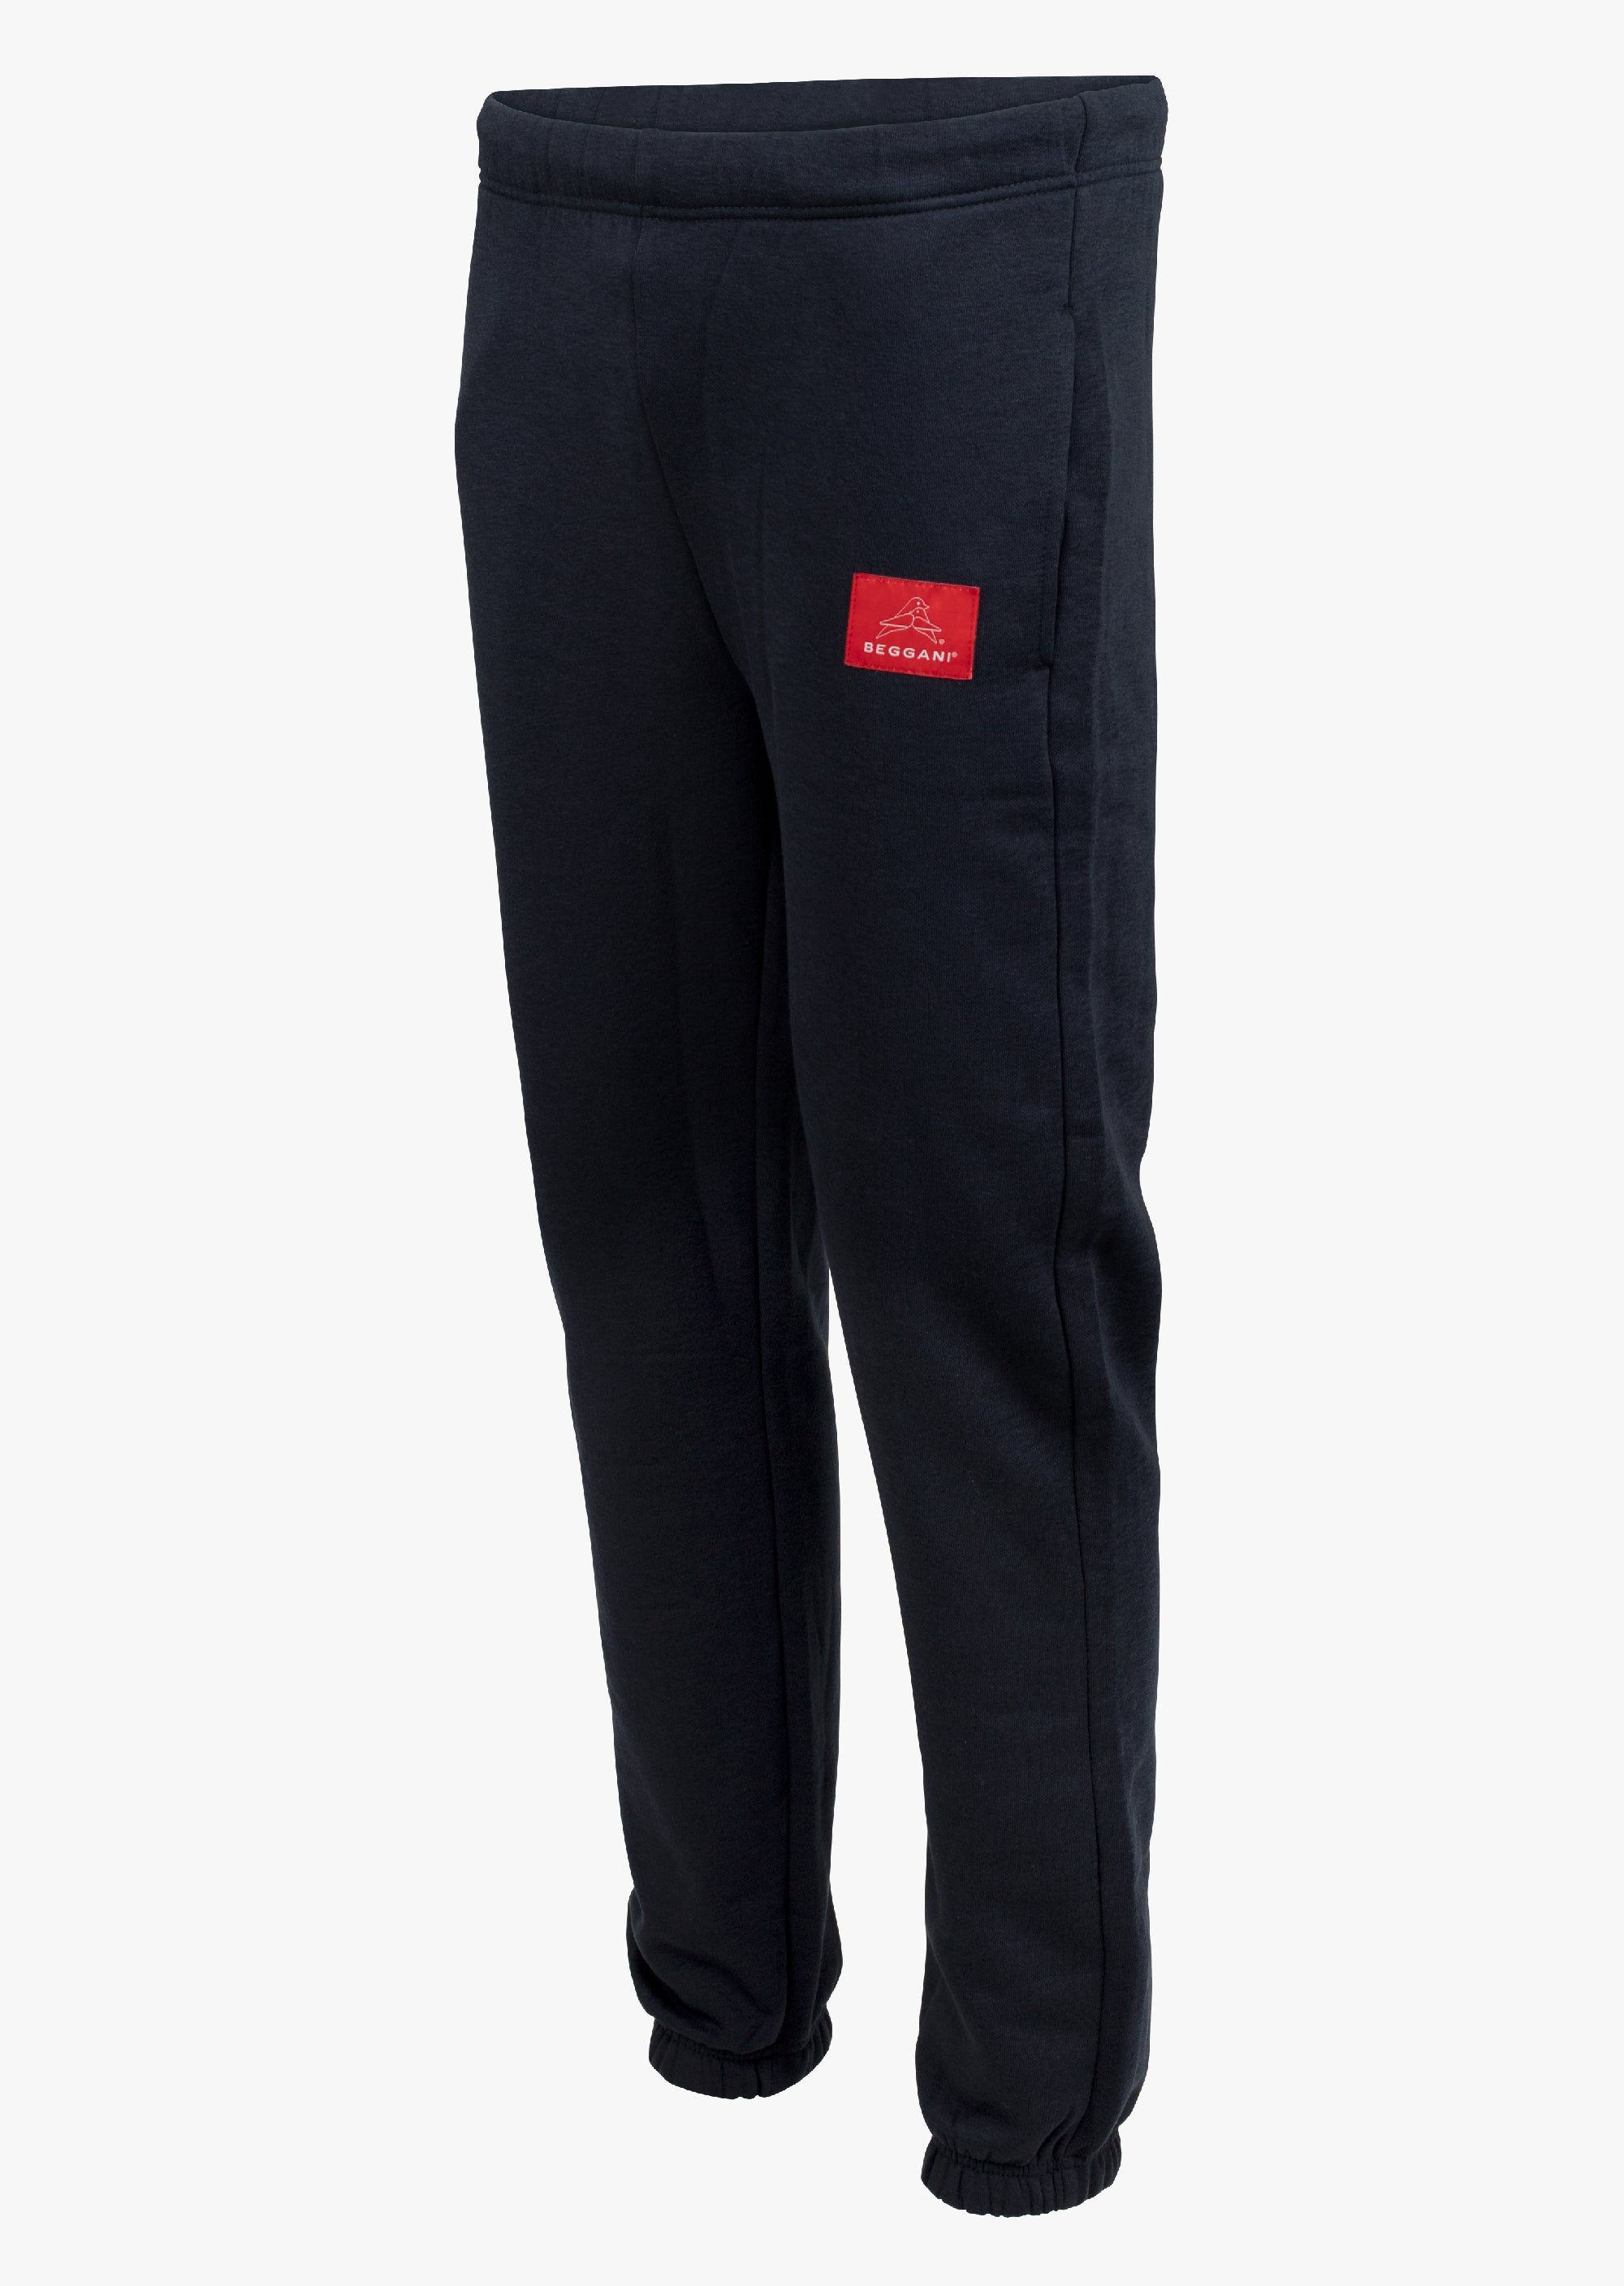 Pants made of soft cotton with logo BEGGANI